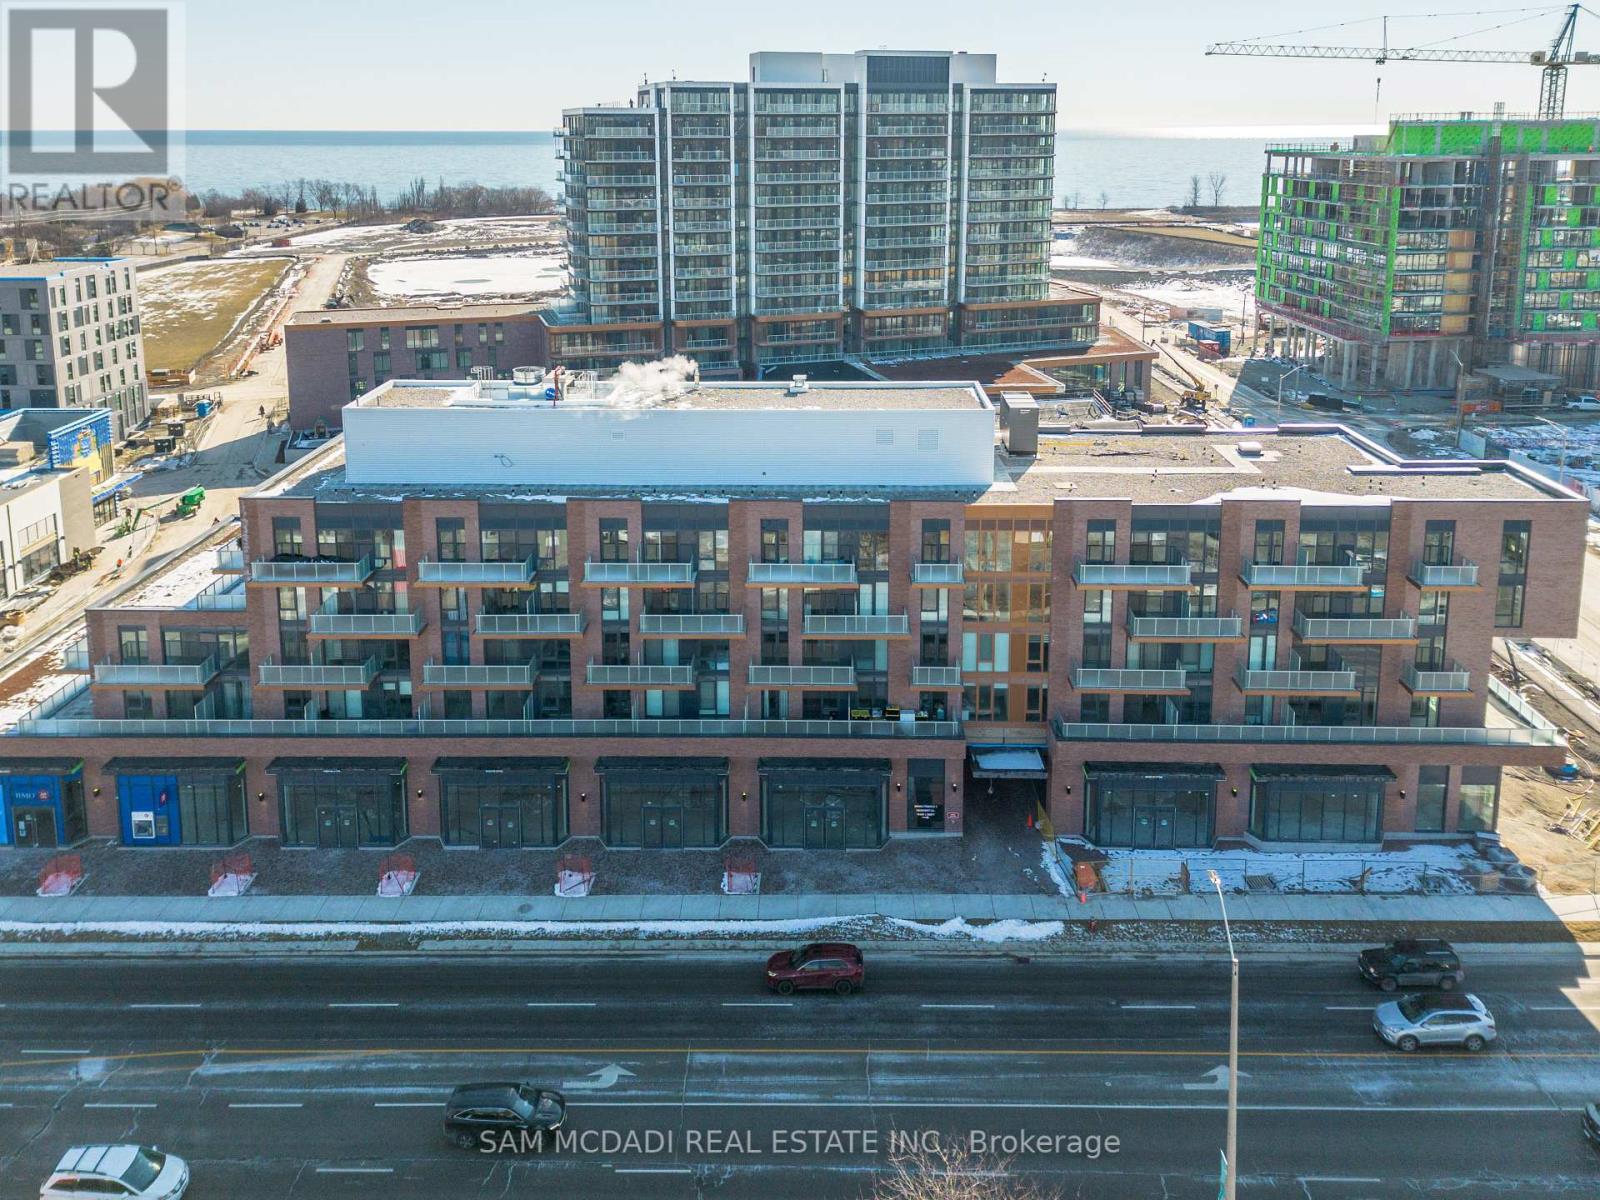 For lease: 556 NOTRE DAME STREET, Lakeshore, Ontario N0R1A0